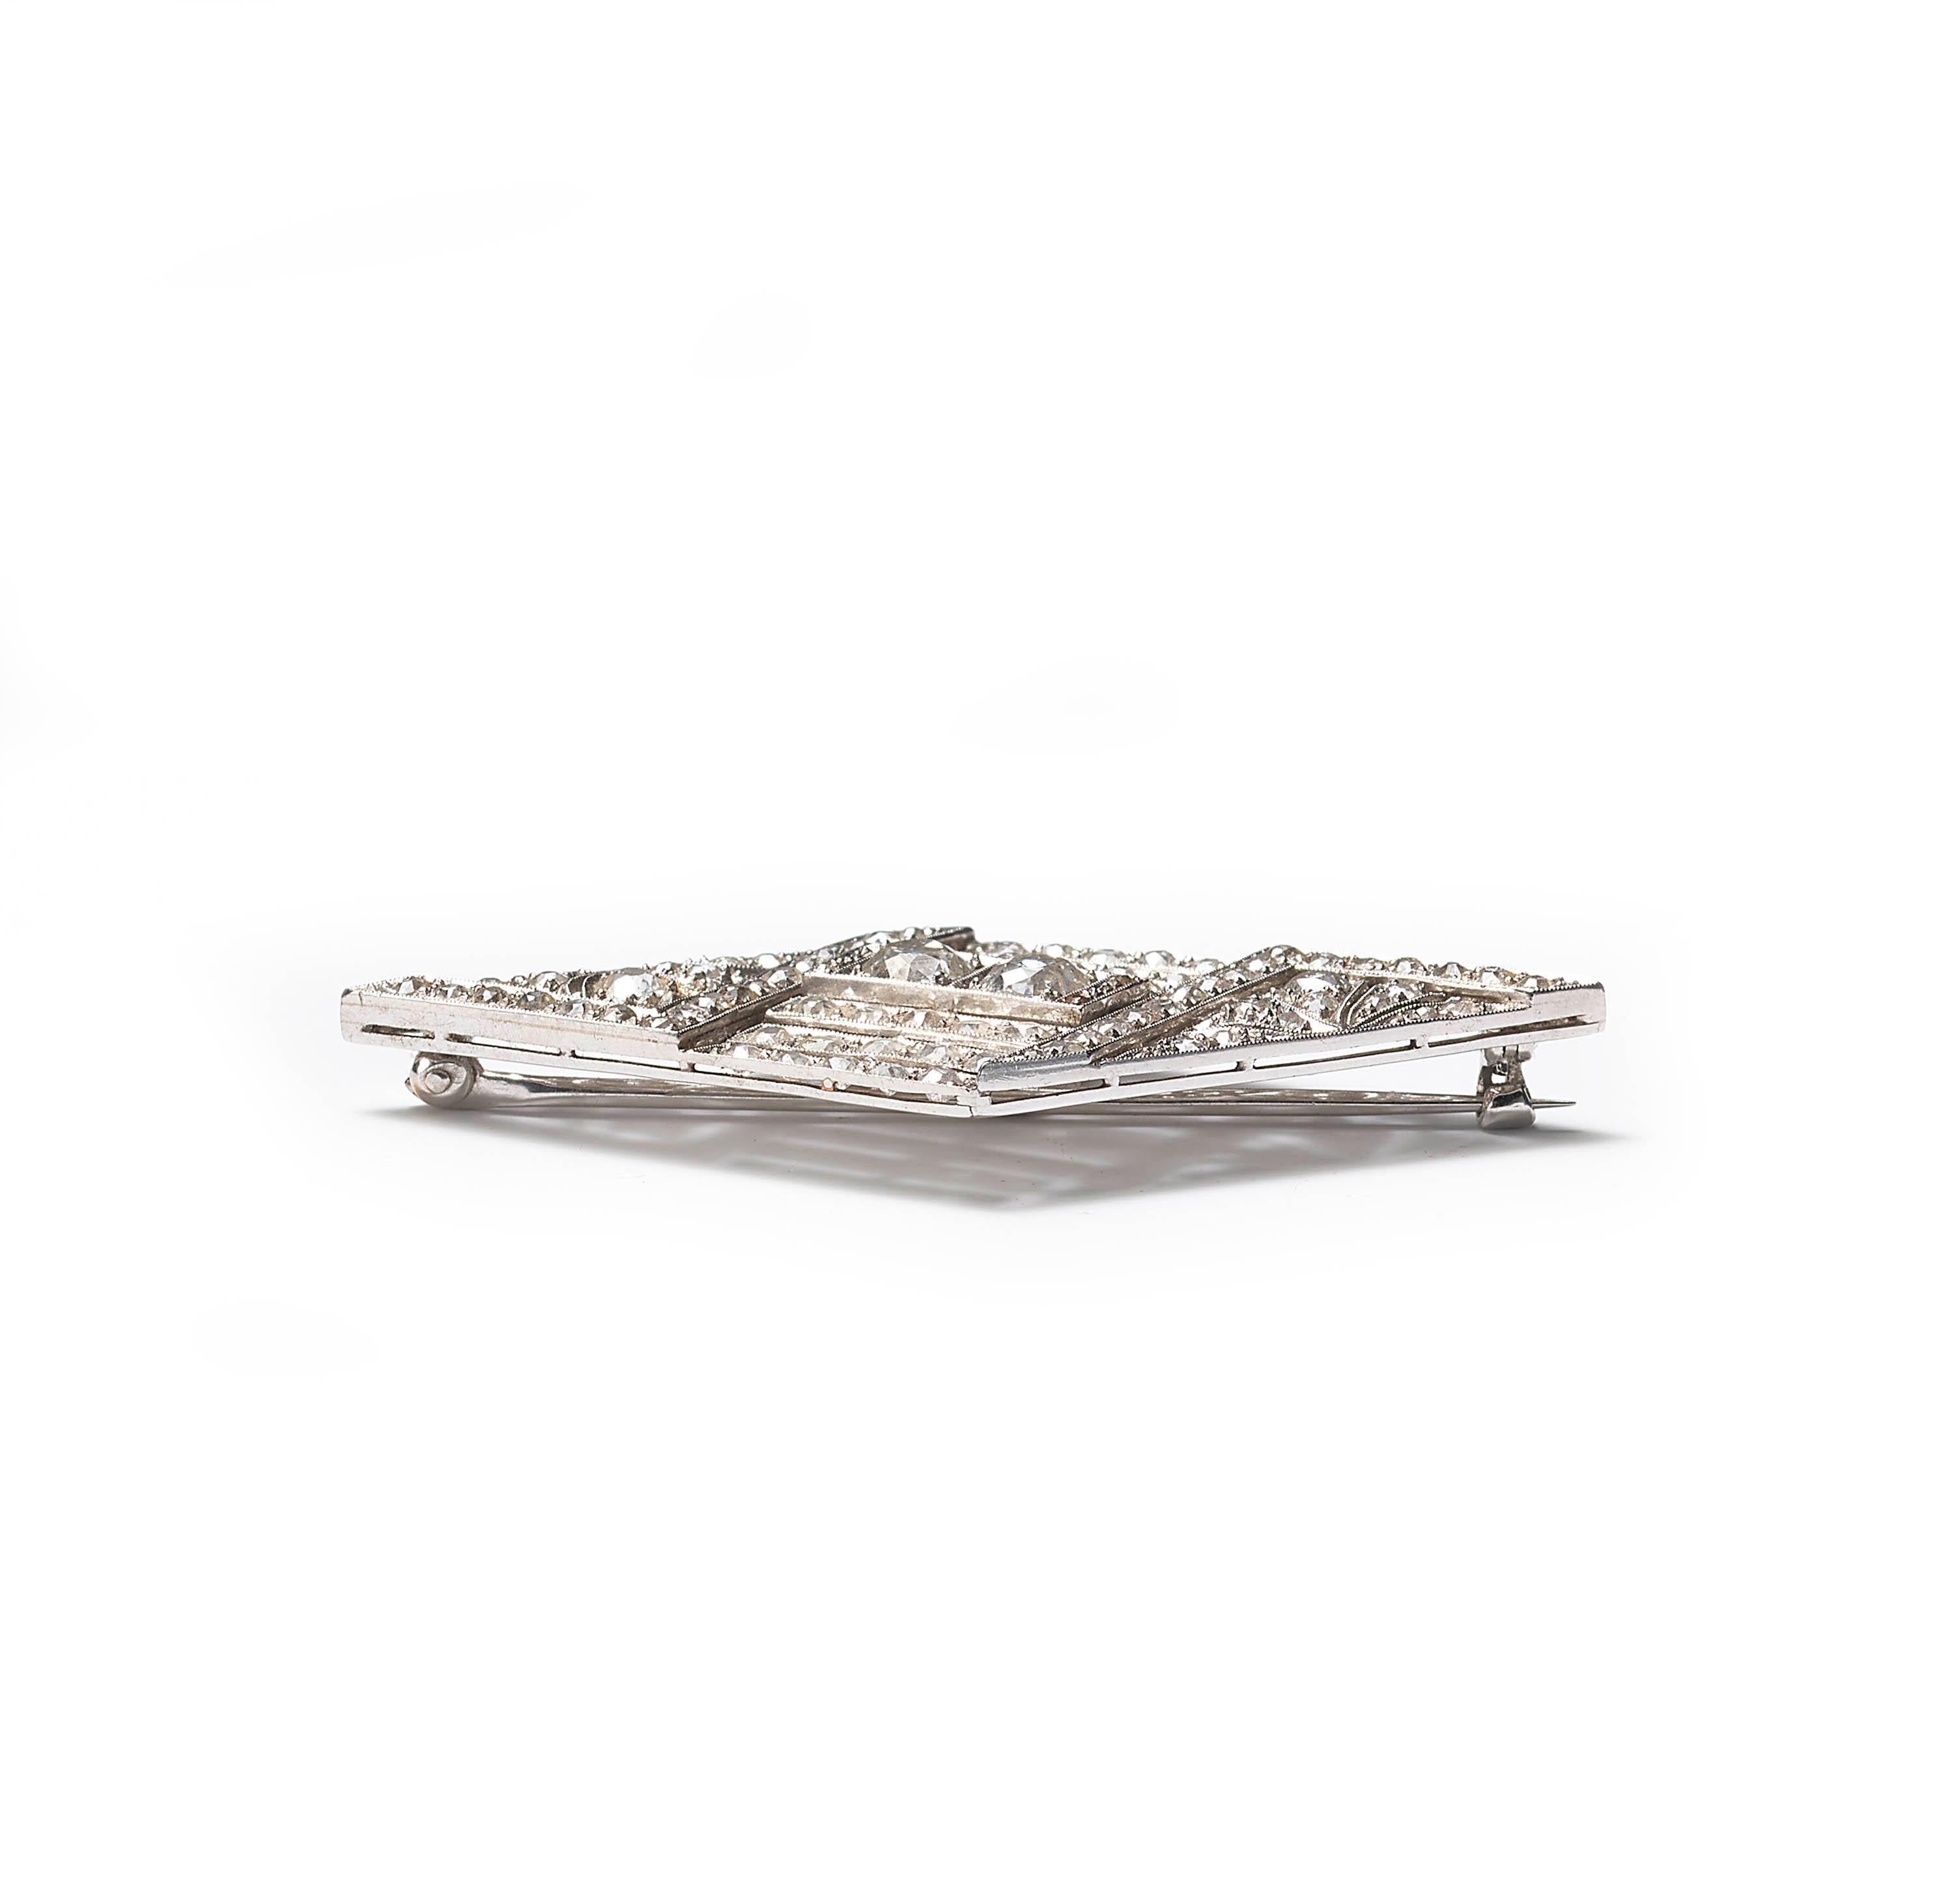 An Art Deco plaque brooch, with a rhombus-shaped outline and a geometric and foliate openwork design, set with old brilliant-cut diamonds, weighing an estimated total of 4.50 carats, with millegrain edges, mounted in platinum, with a pin and 'C'